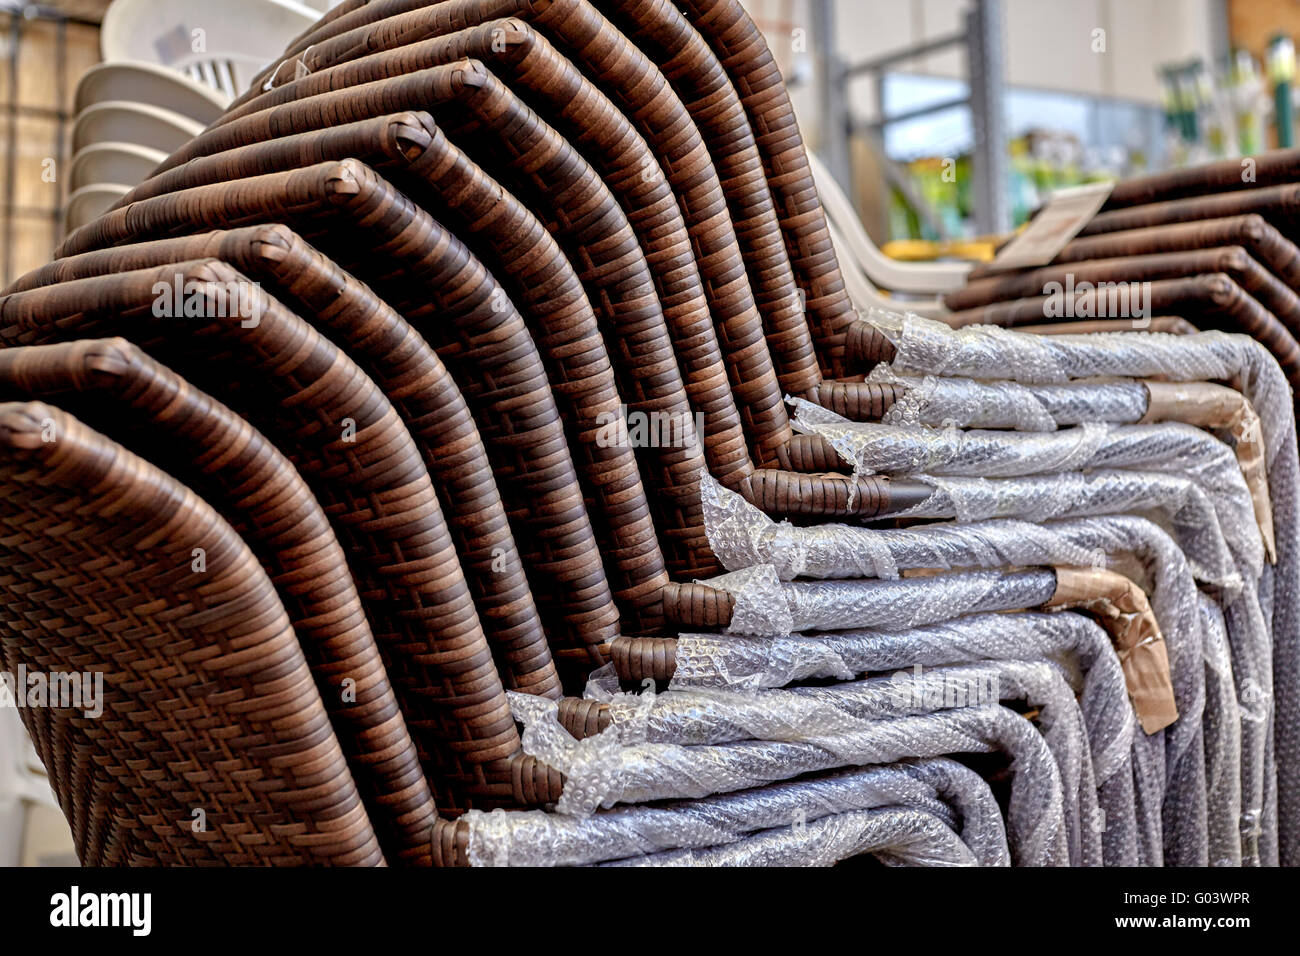 Stack of new wicker patio chairs in a retail store Stock Photo